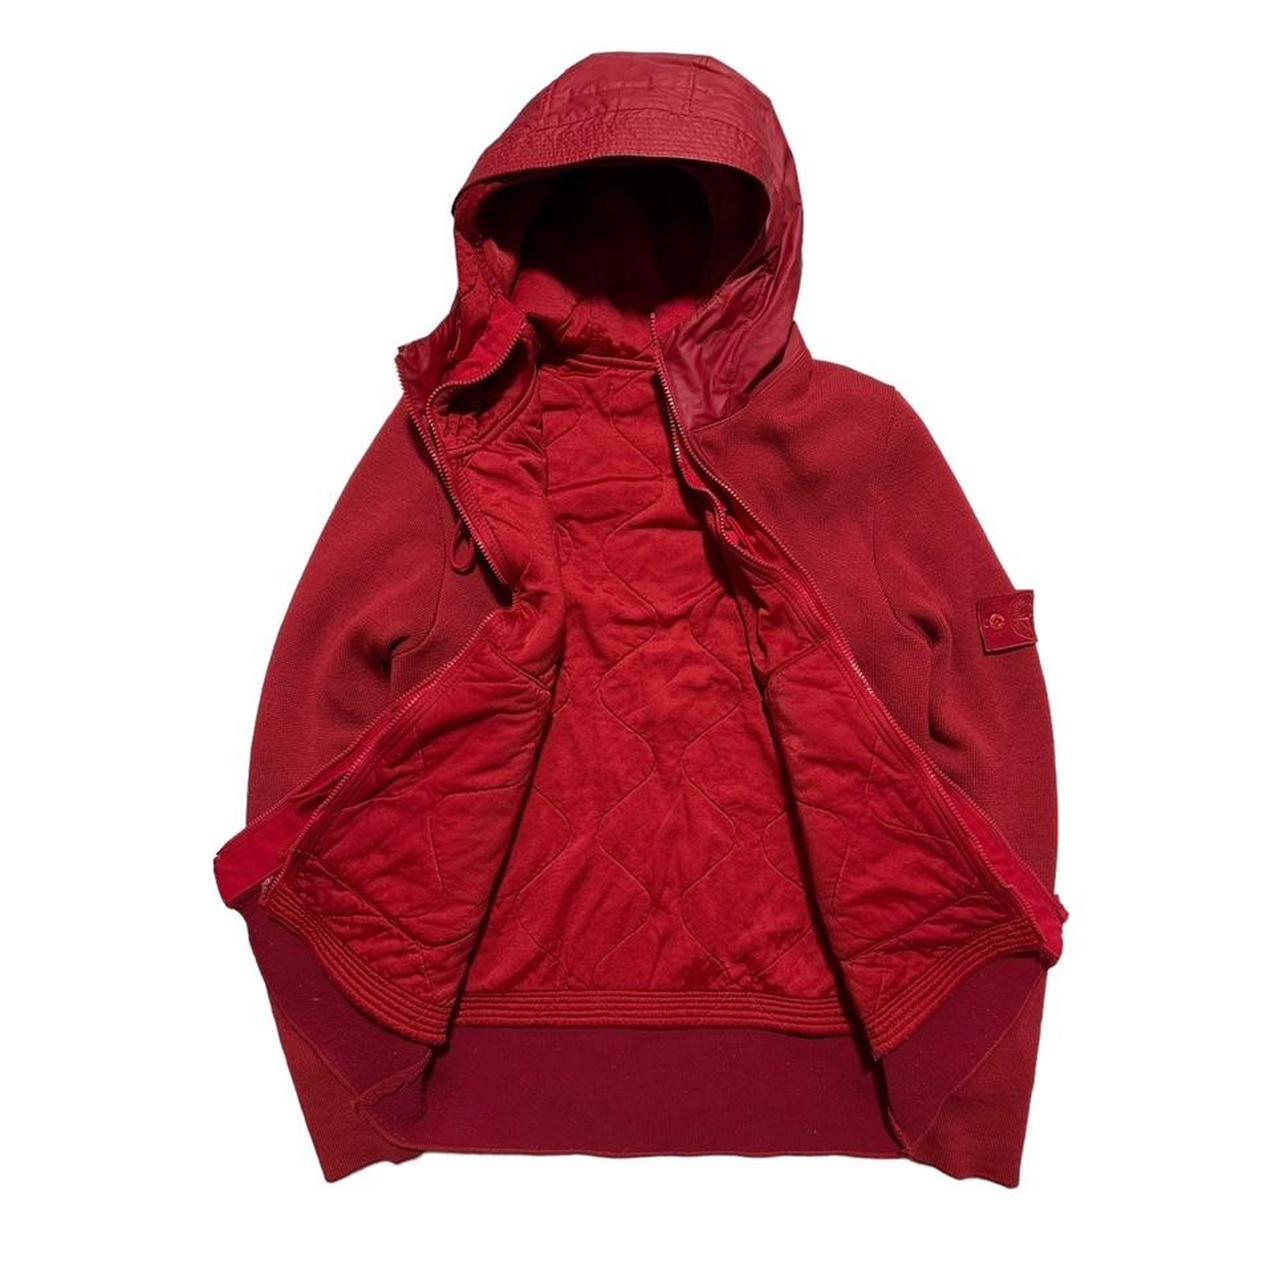 Stone Island 2013 Red Ghost Presidential Knit Jacket